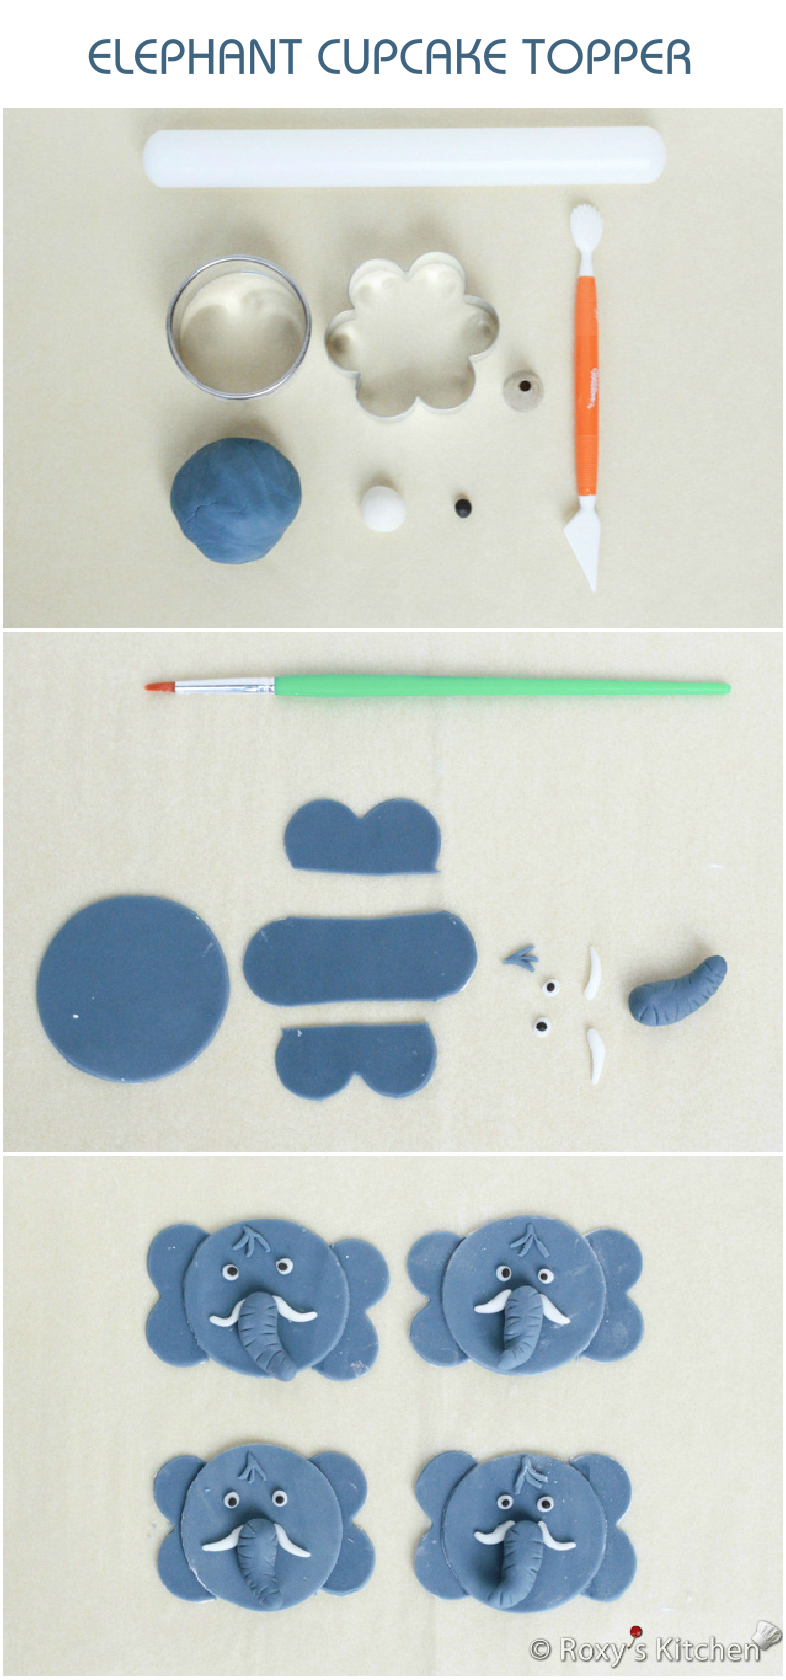 Tutorial with Step by Step Instructions & Photos - How to Make a Fondant Elephant Cupcake Topper